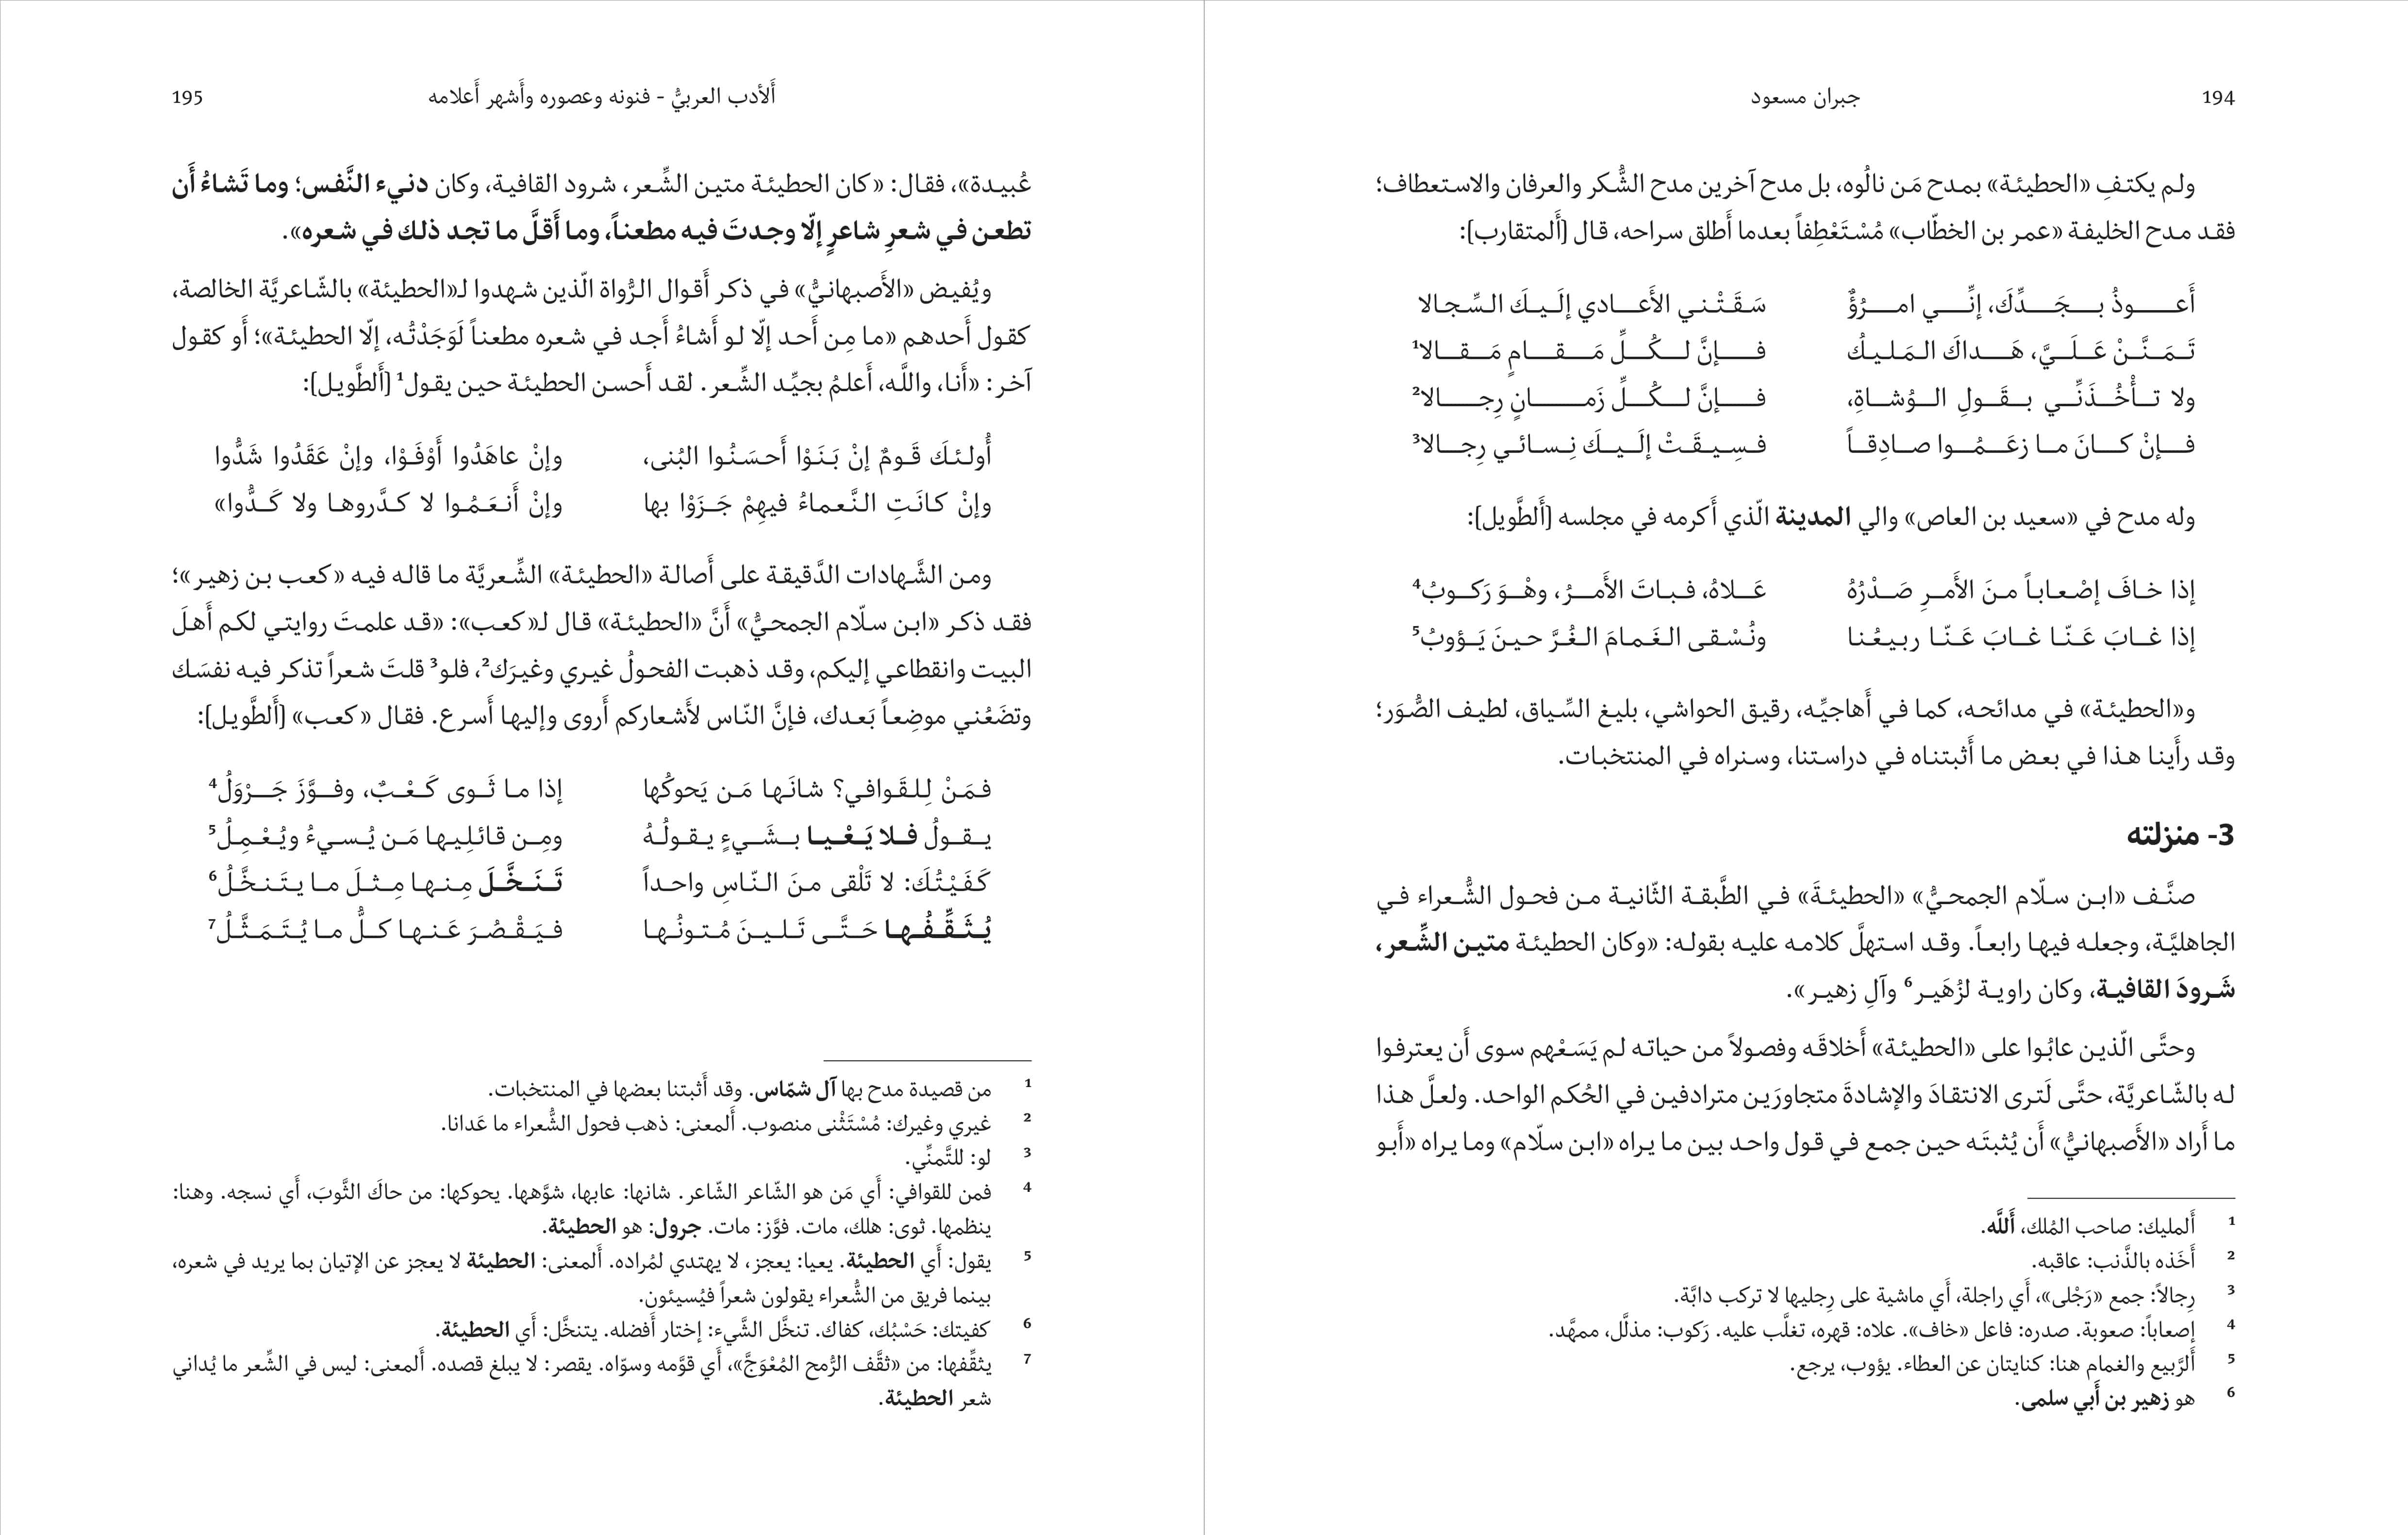 A two-page spread from a Hacehette Antoine publication of Arabic poetry.